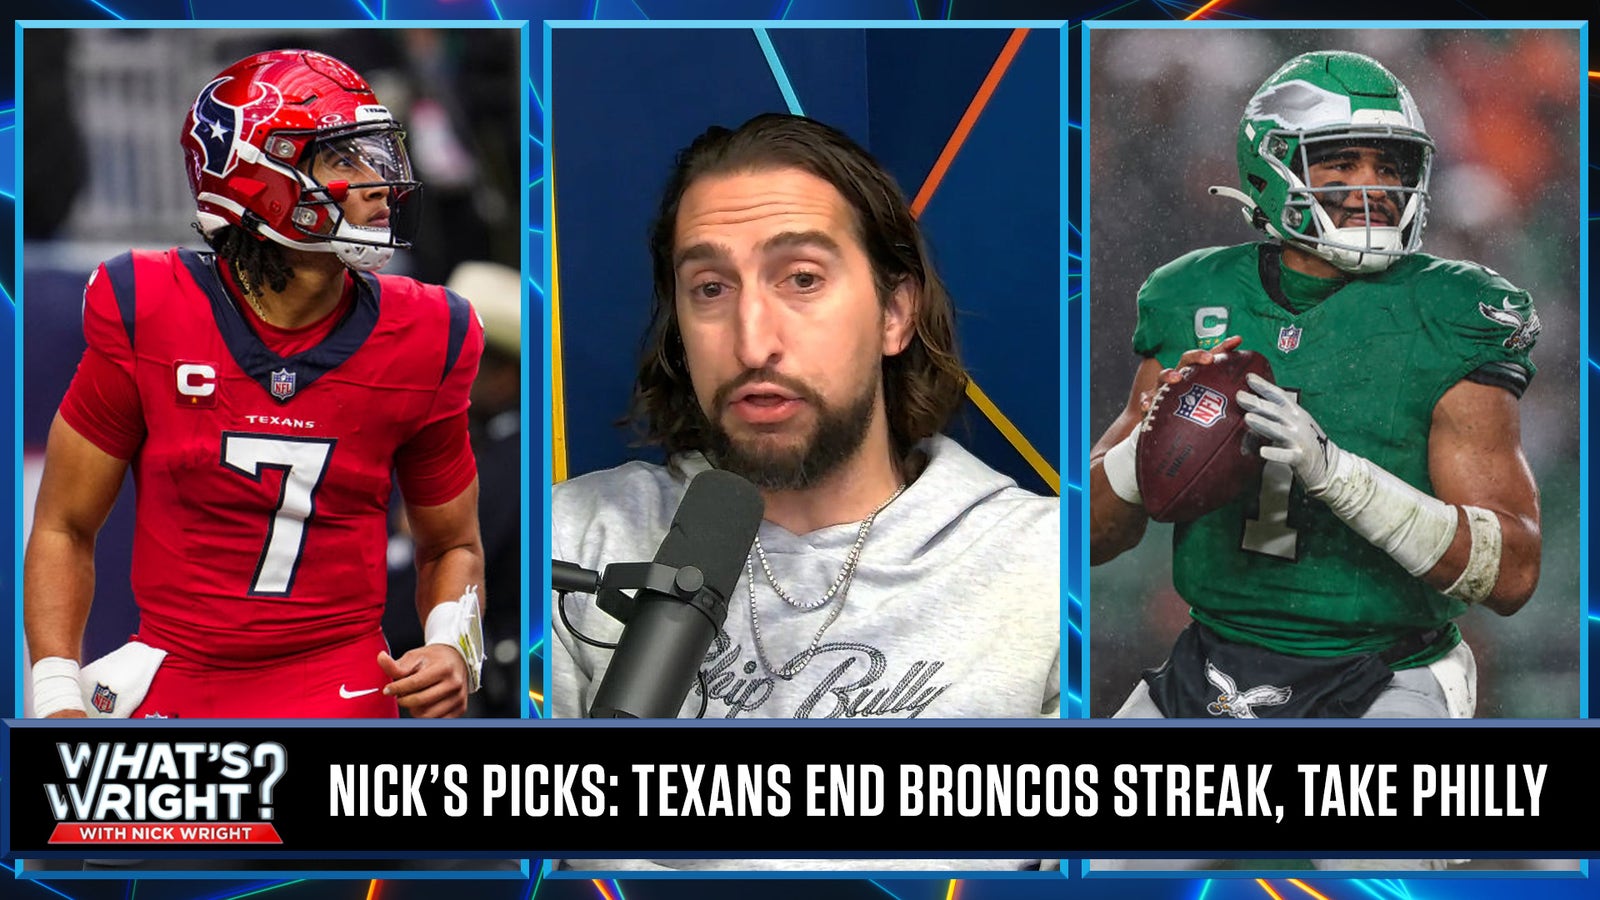 Nick's Picks: Texans end Broncos streak, underdog Eagles are 'must-bet' in Week 13 | What's Wright?